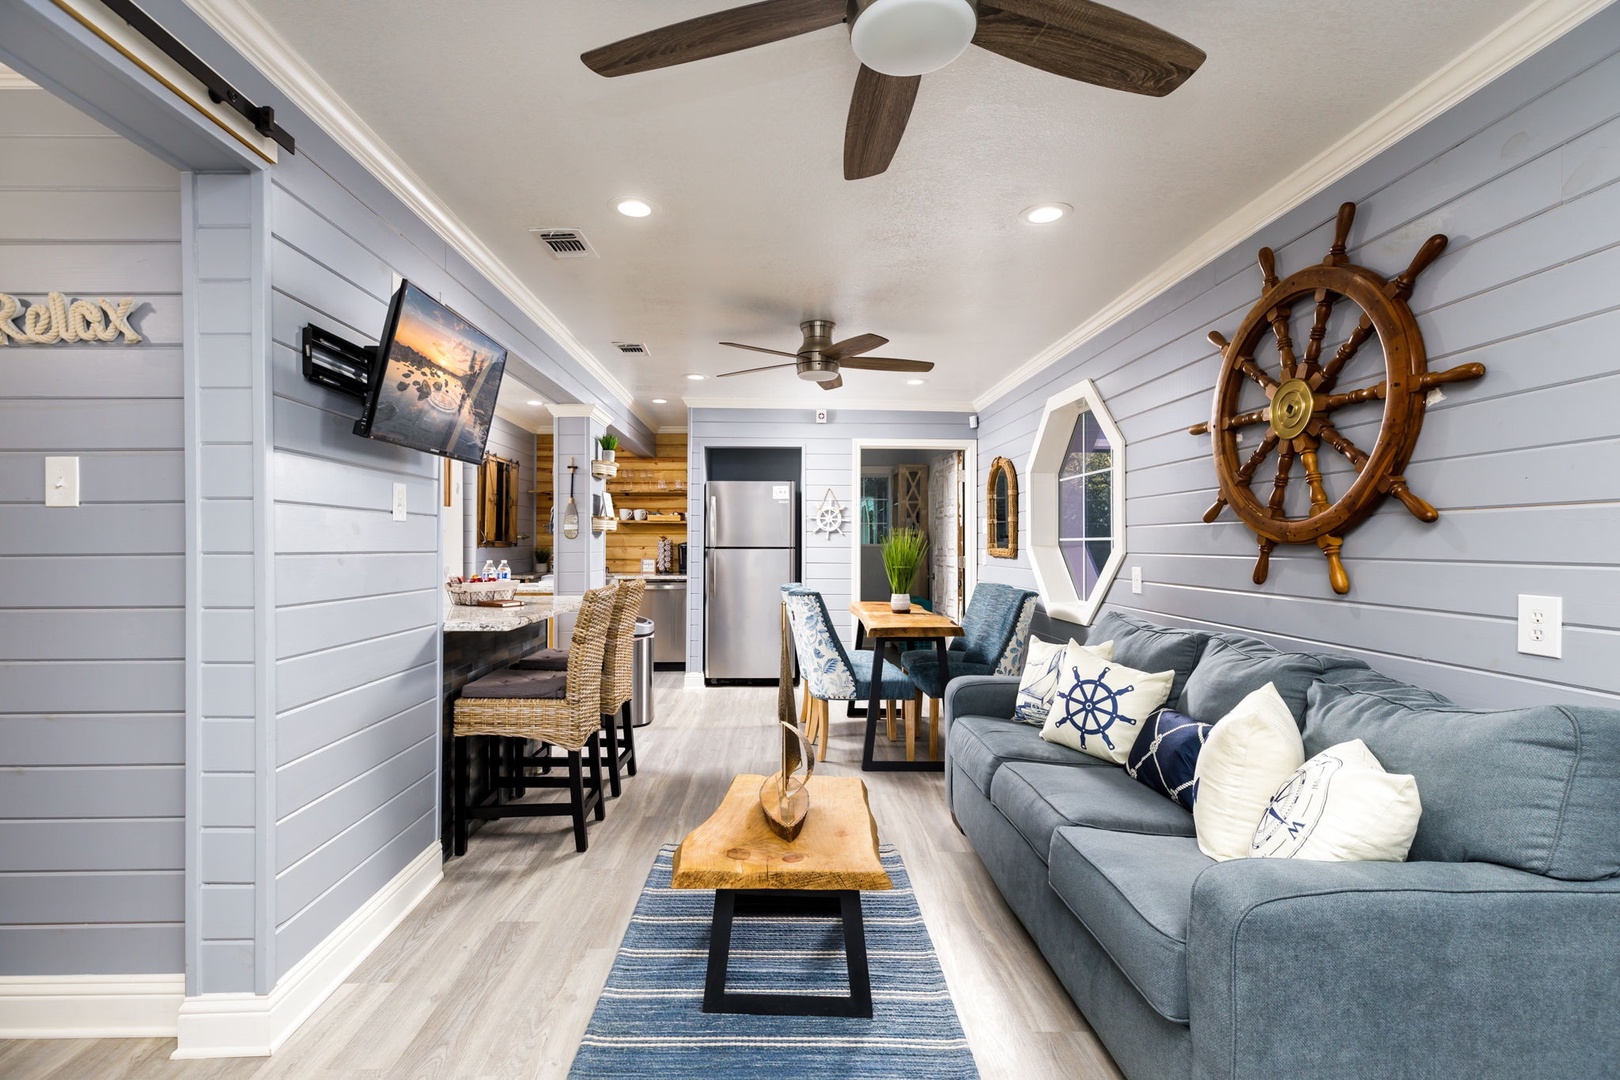 Enjoy the breezy, open layout of the cabin’s main living area